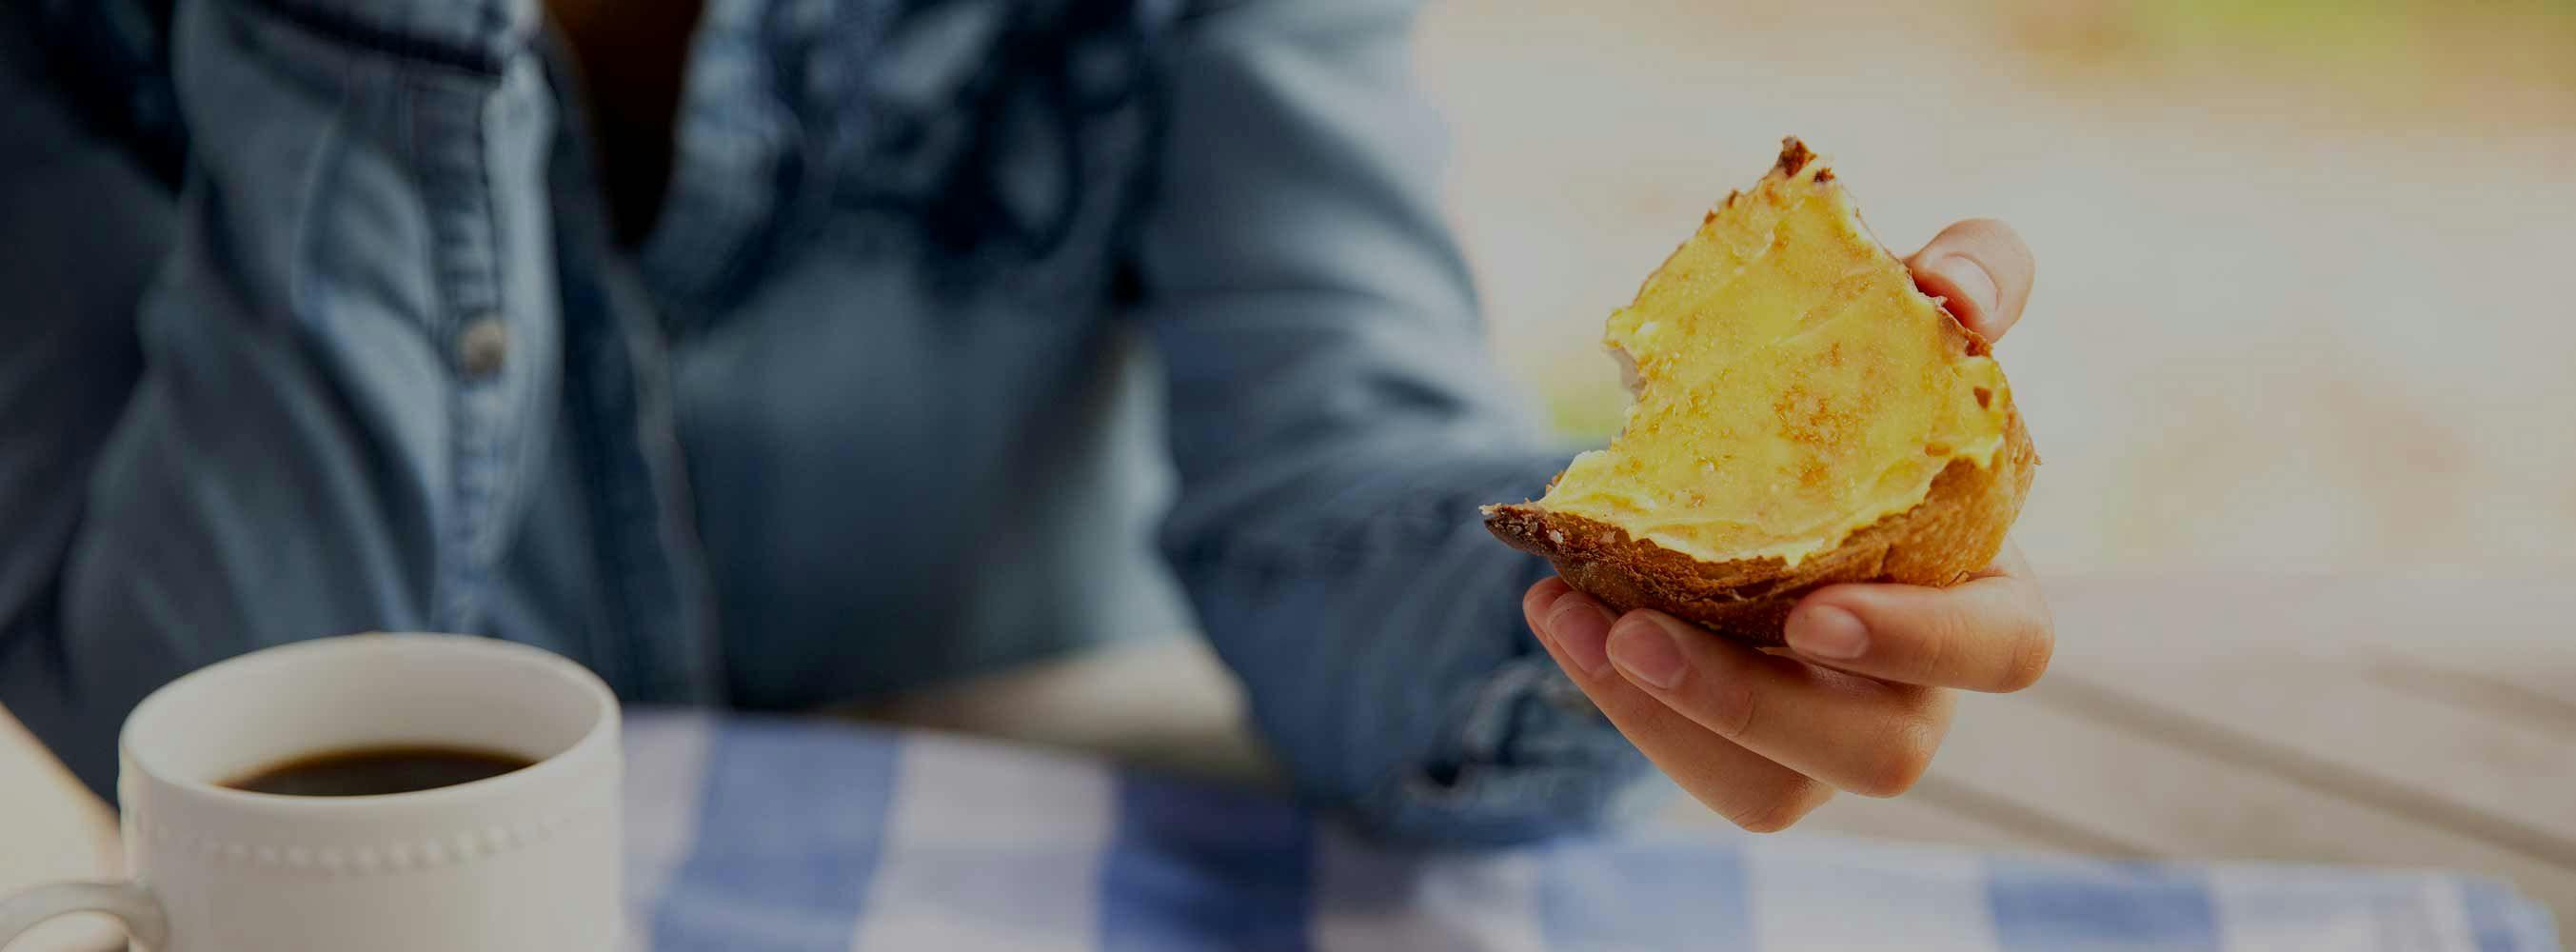 A person holding bread with ghee spread on top of it.